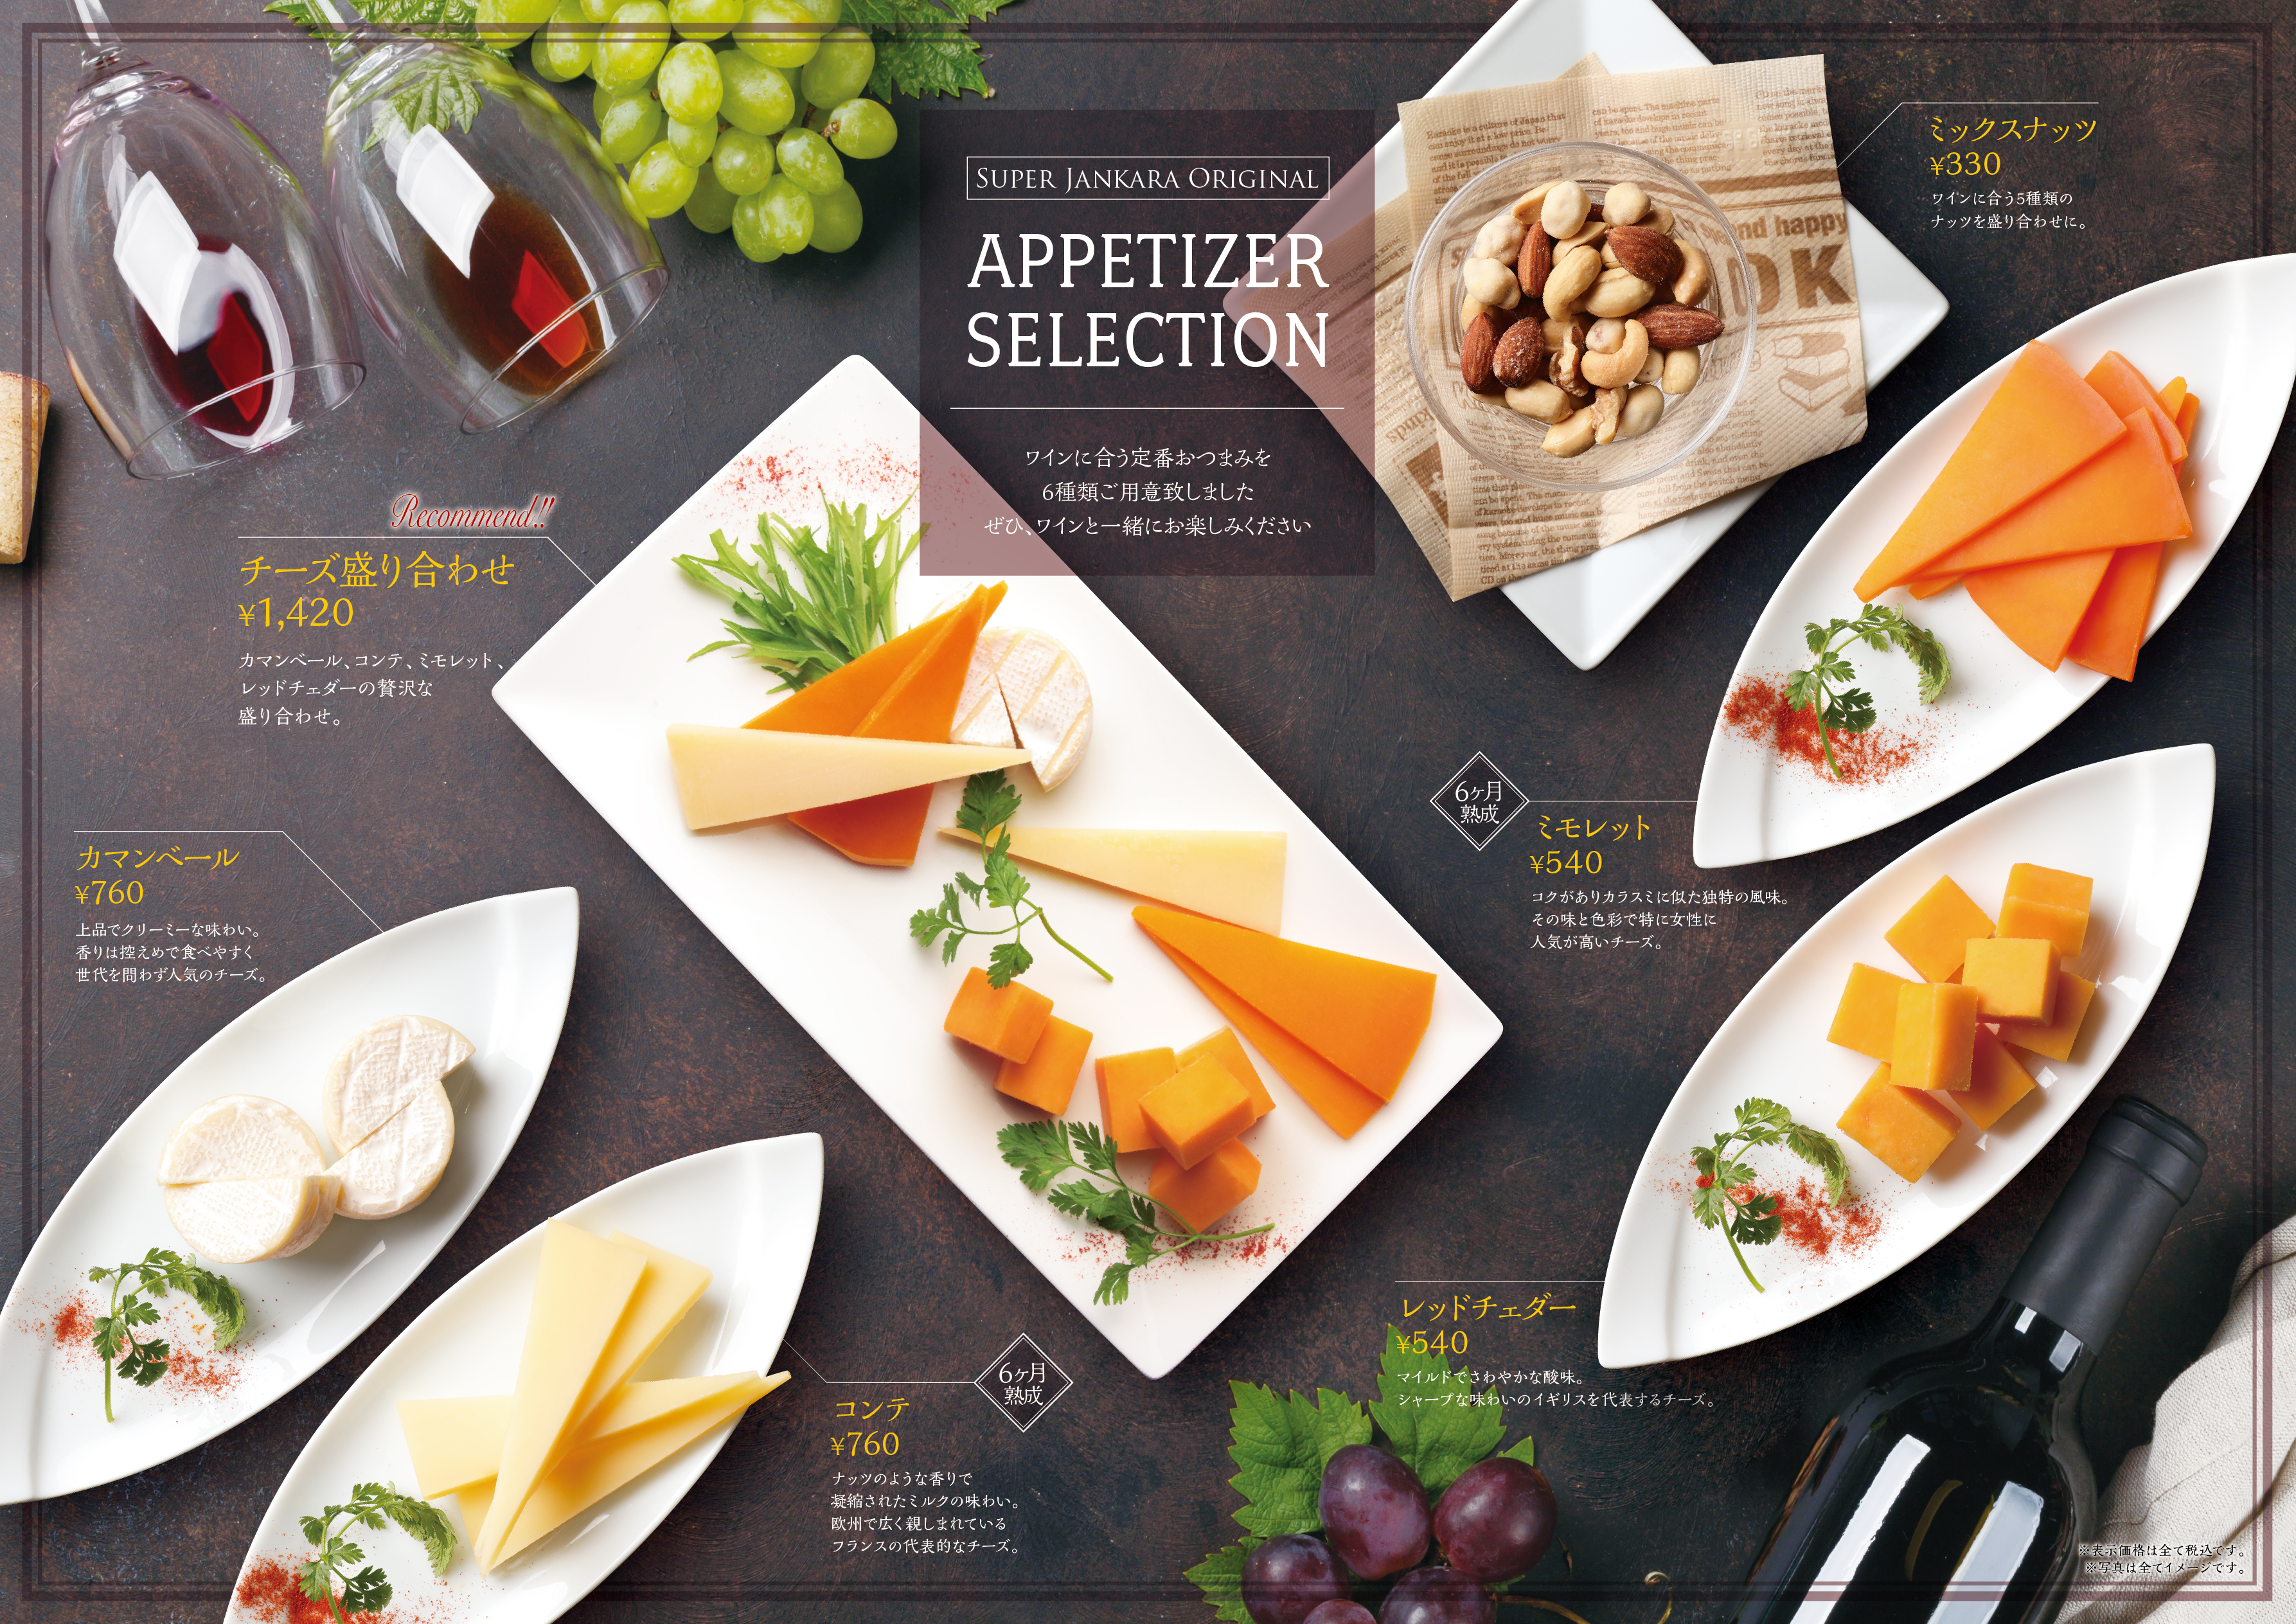 APPETIZER SELECTION